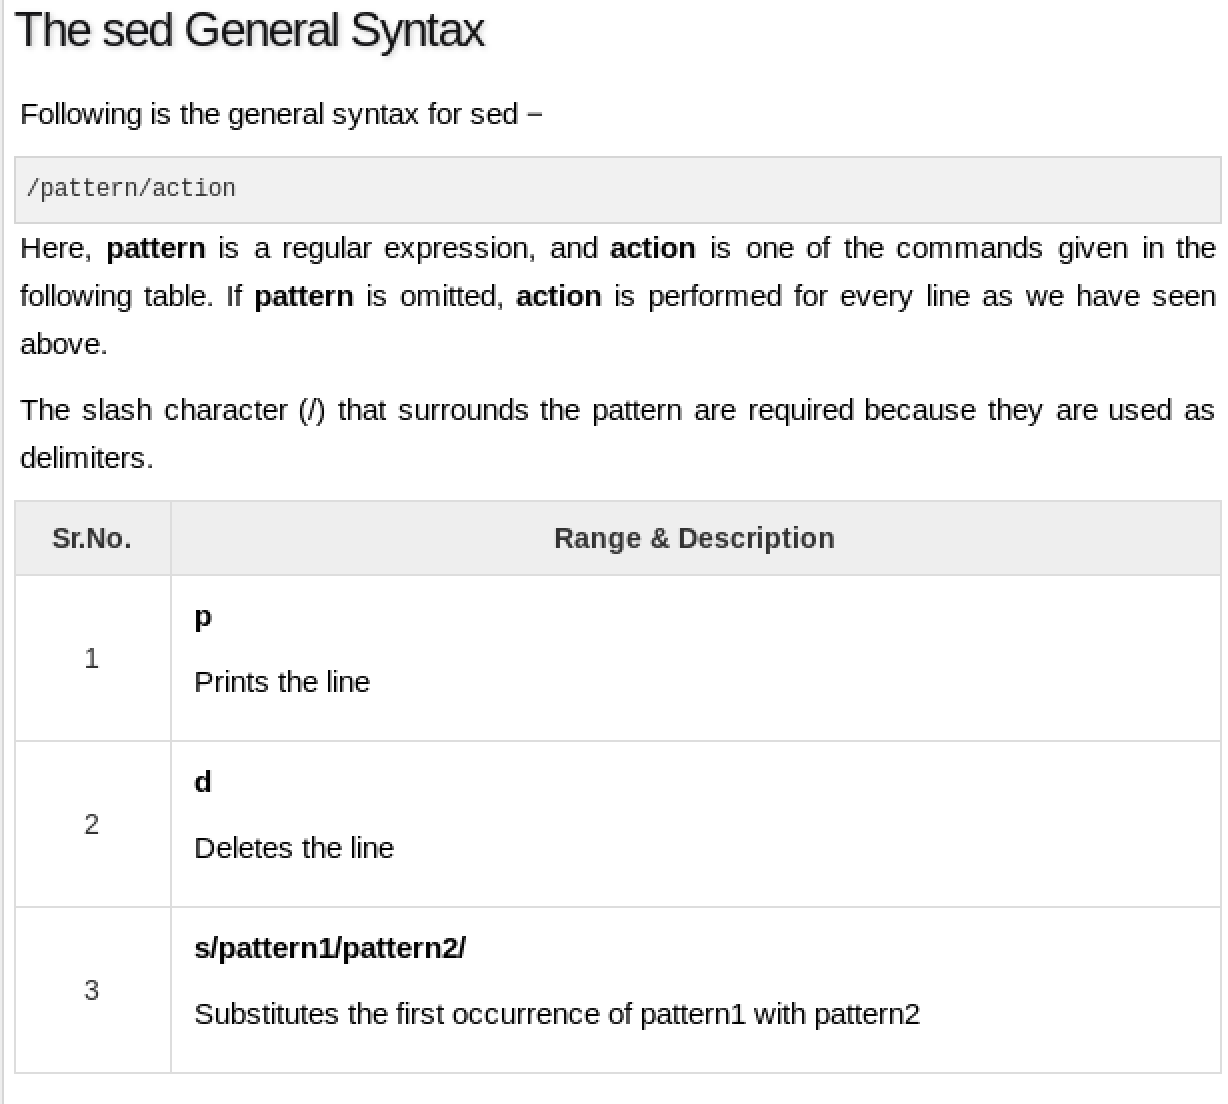 The sed General Syntax